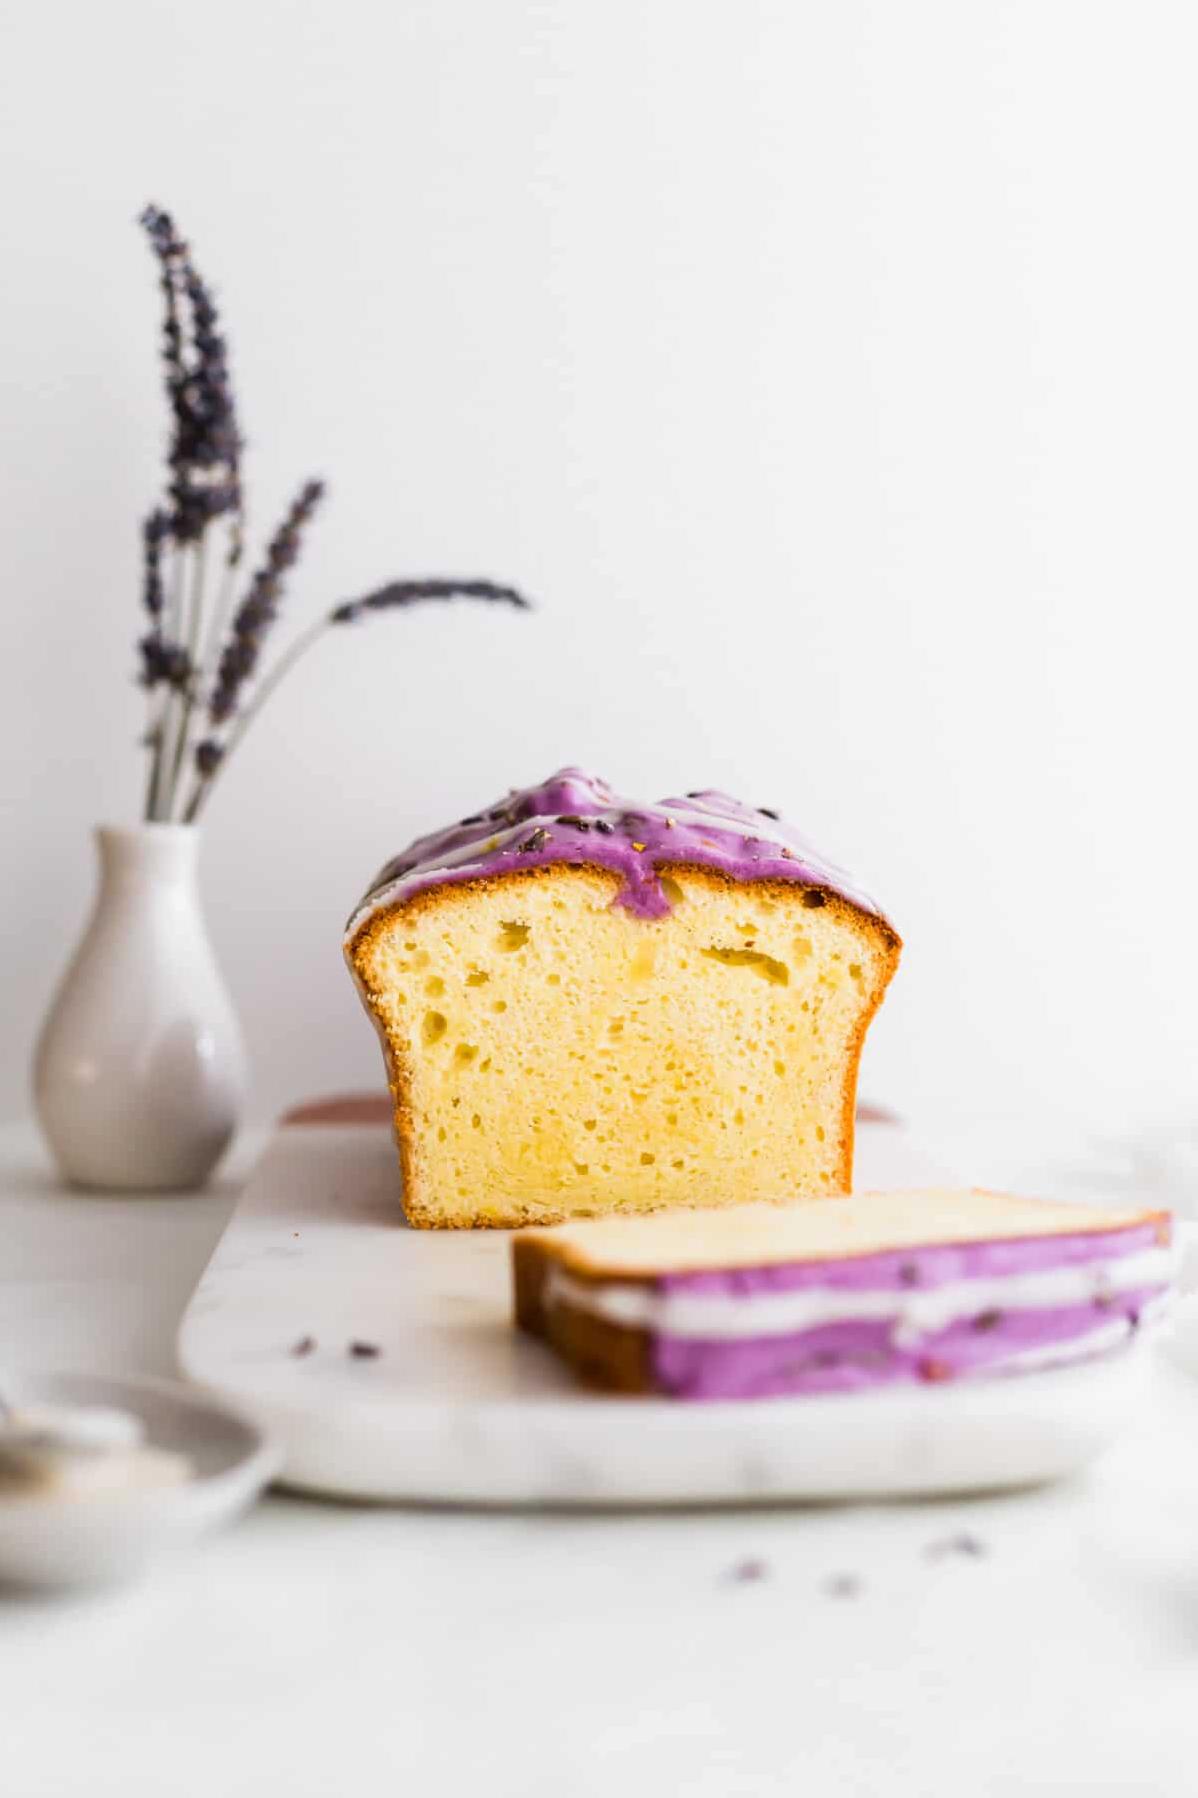  Satisfy your sweet tooth with a slice of this lavender and lemon pound cake